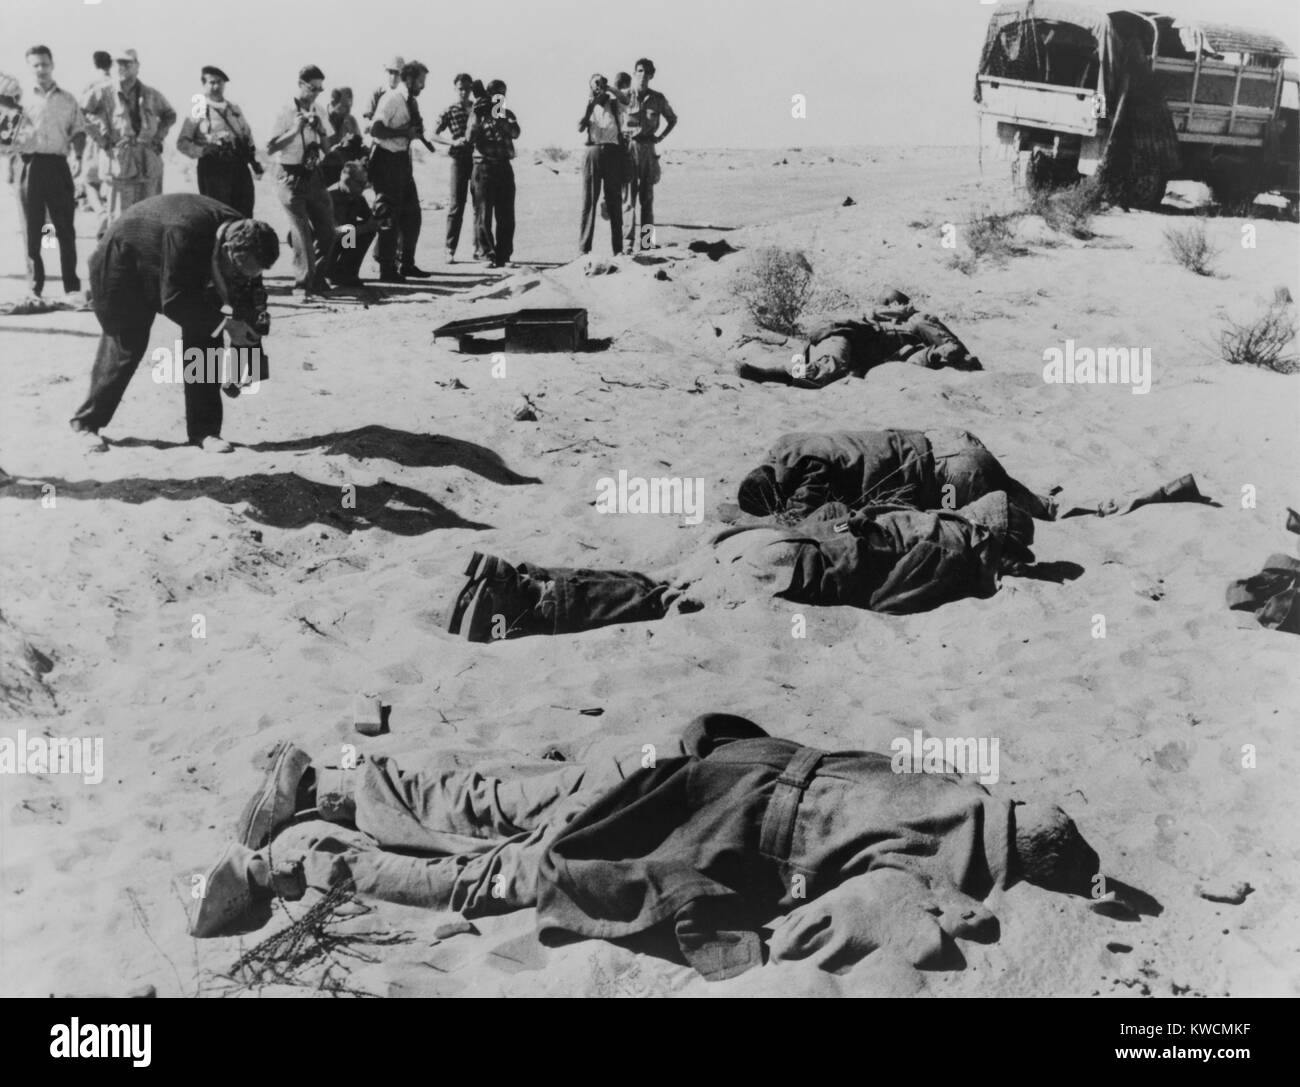 Bodies of dead Egyptian soldiers lying in the Sinai desert following Israeli advance. Photographers take pictures of the casualties of the Suez Crisis, in which Britain, France and Israel attacked Egypt that followed dispute over the Suez Canal. Oct. 29-Nov. 7, 1956. - (BSLOC 2014 15 215) Stock Photo